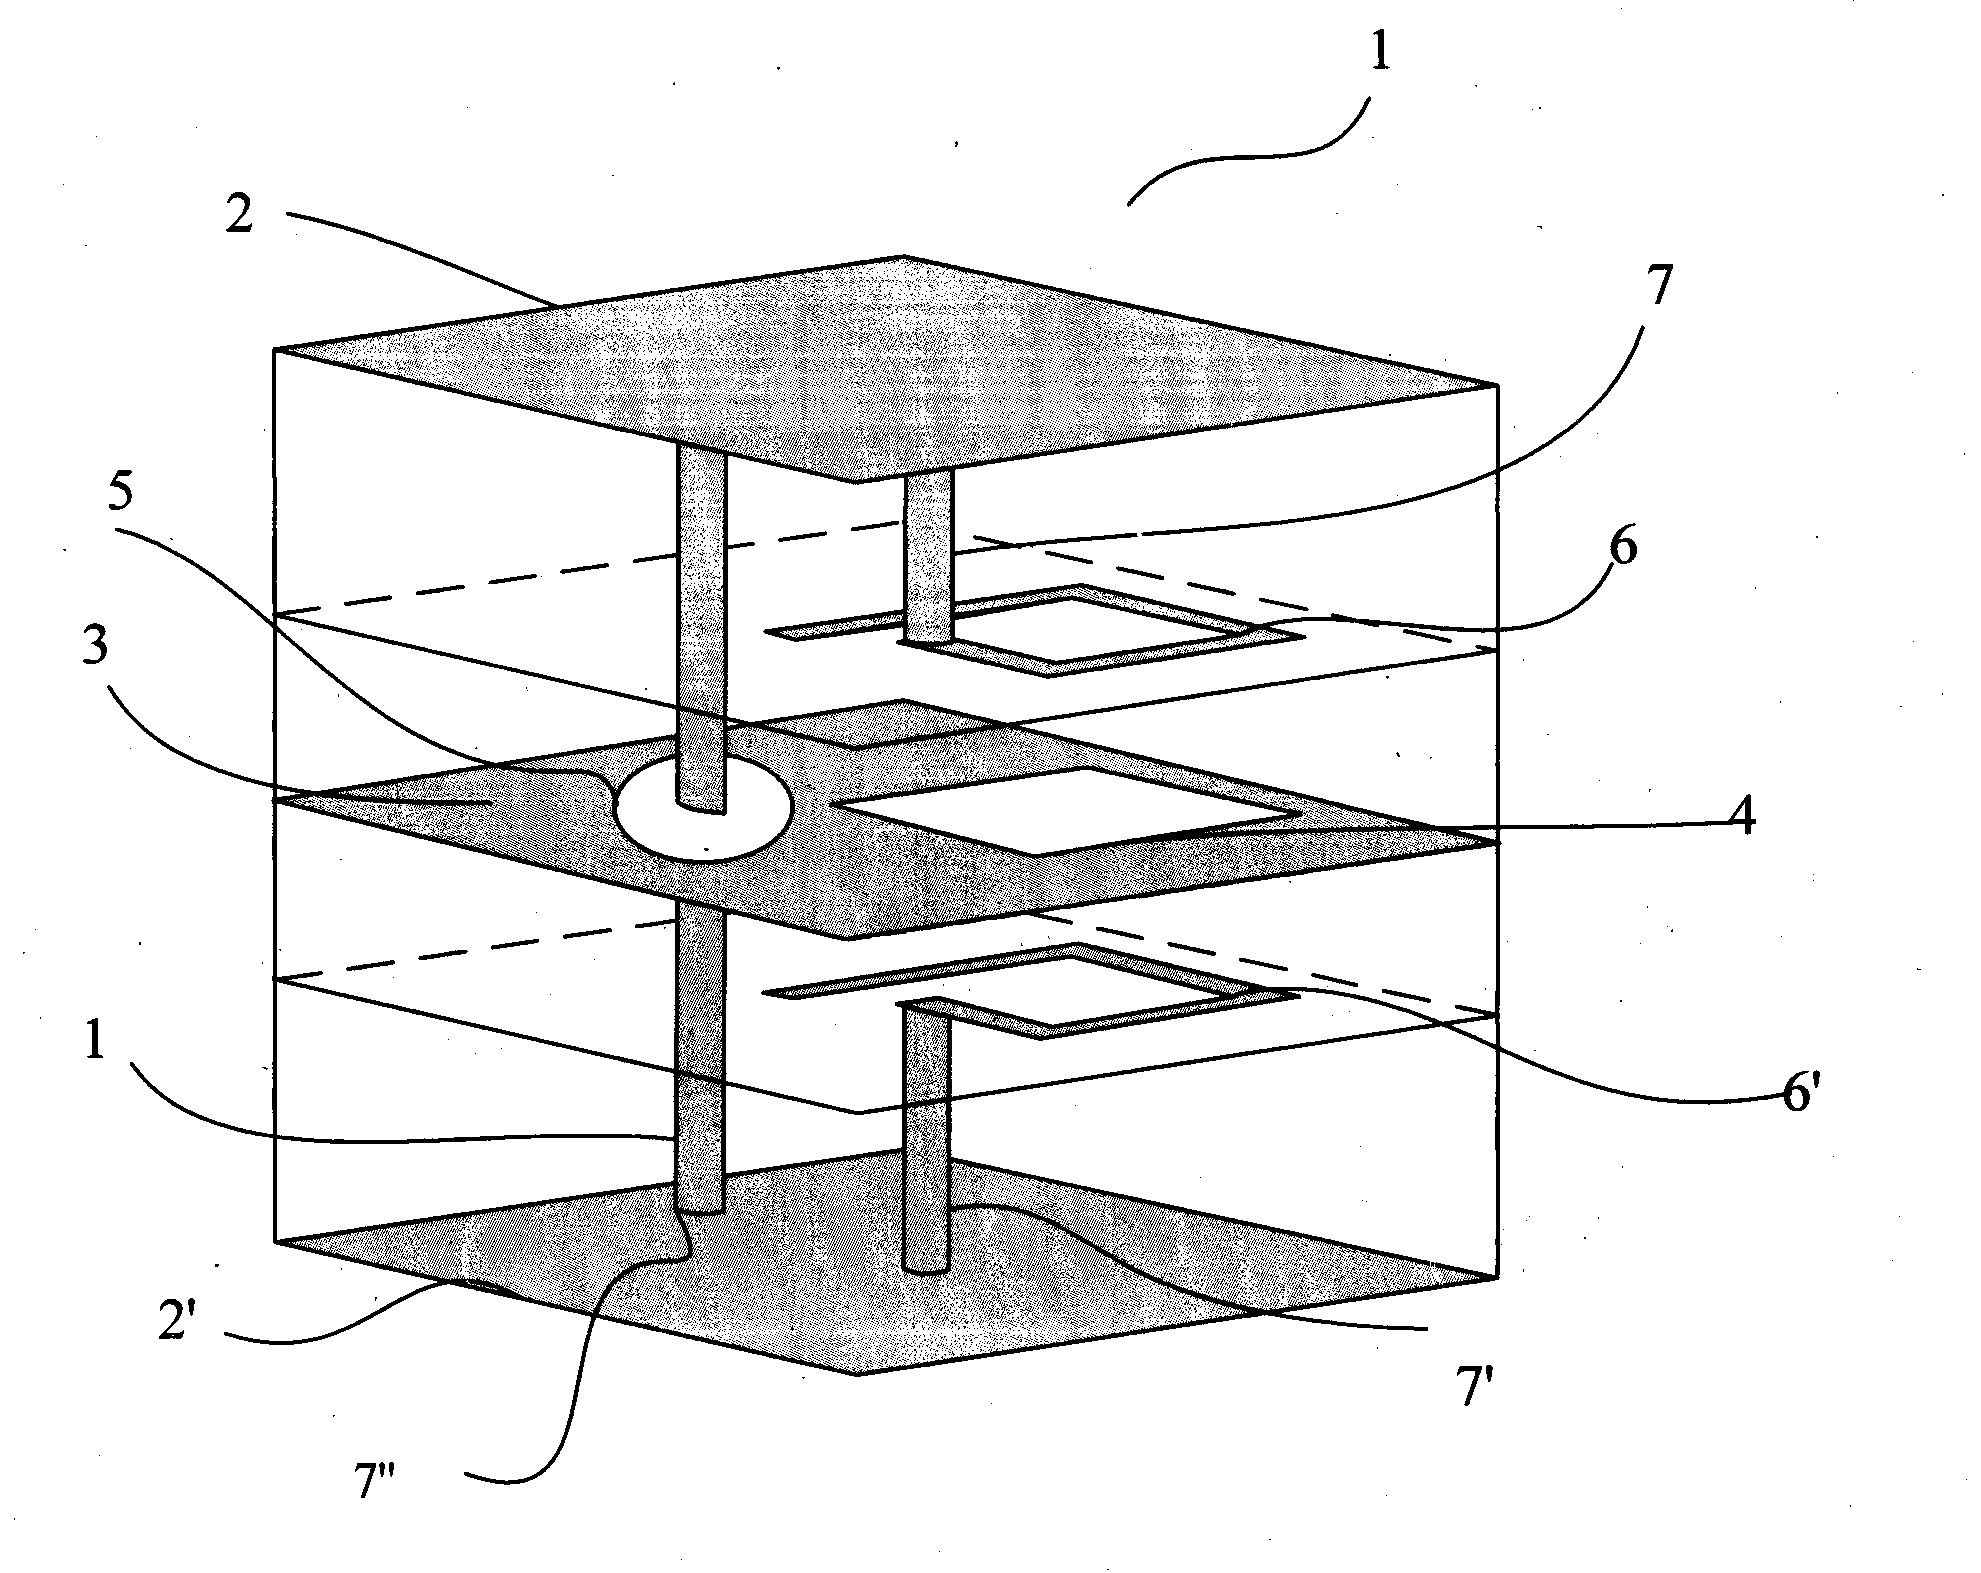 Electromagnetic shielding structure